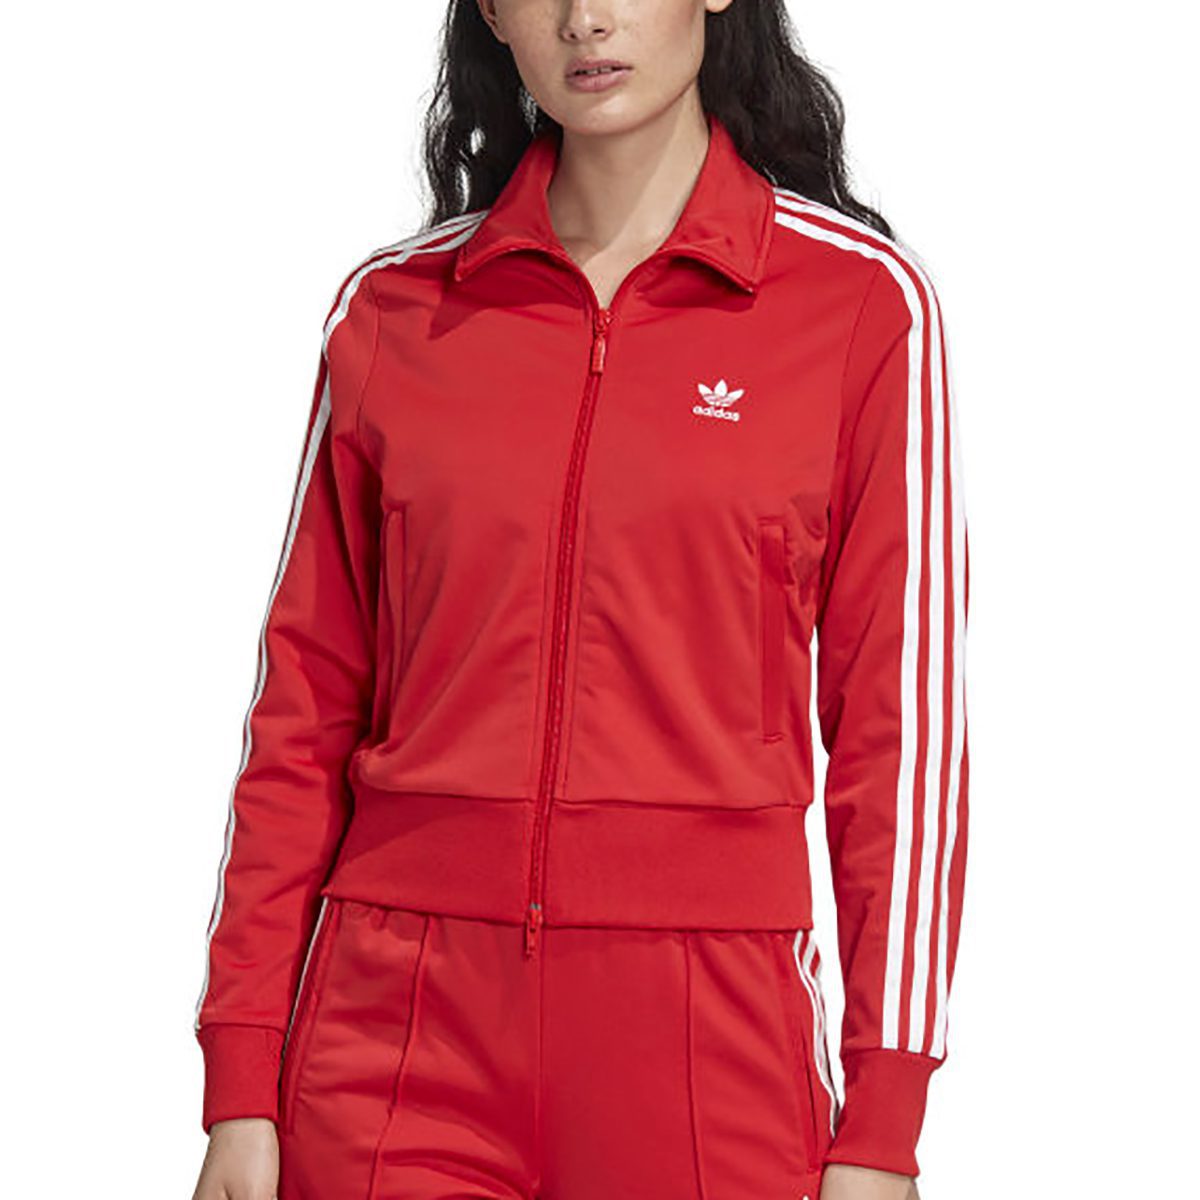 women's red and white adidas jacket